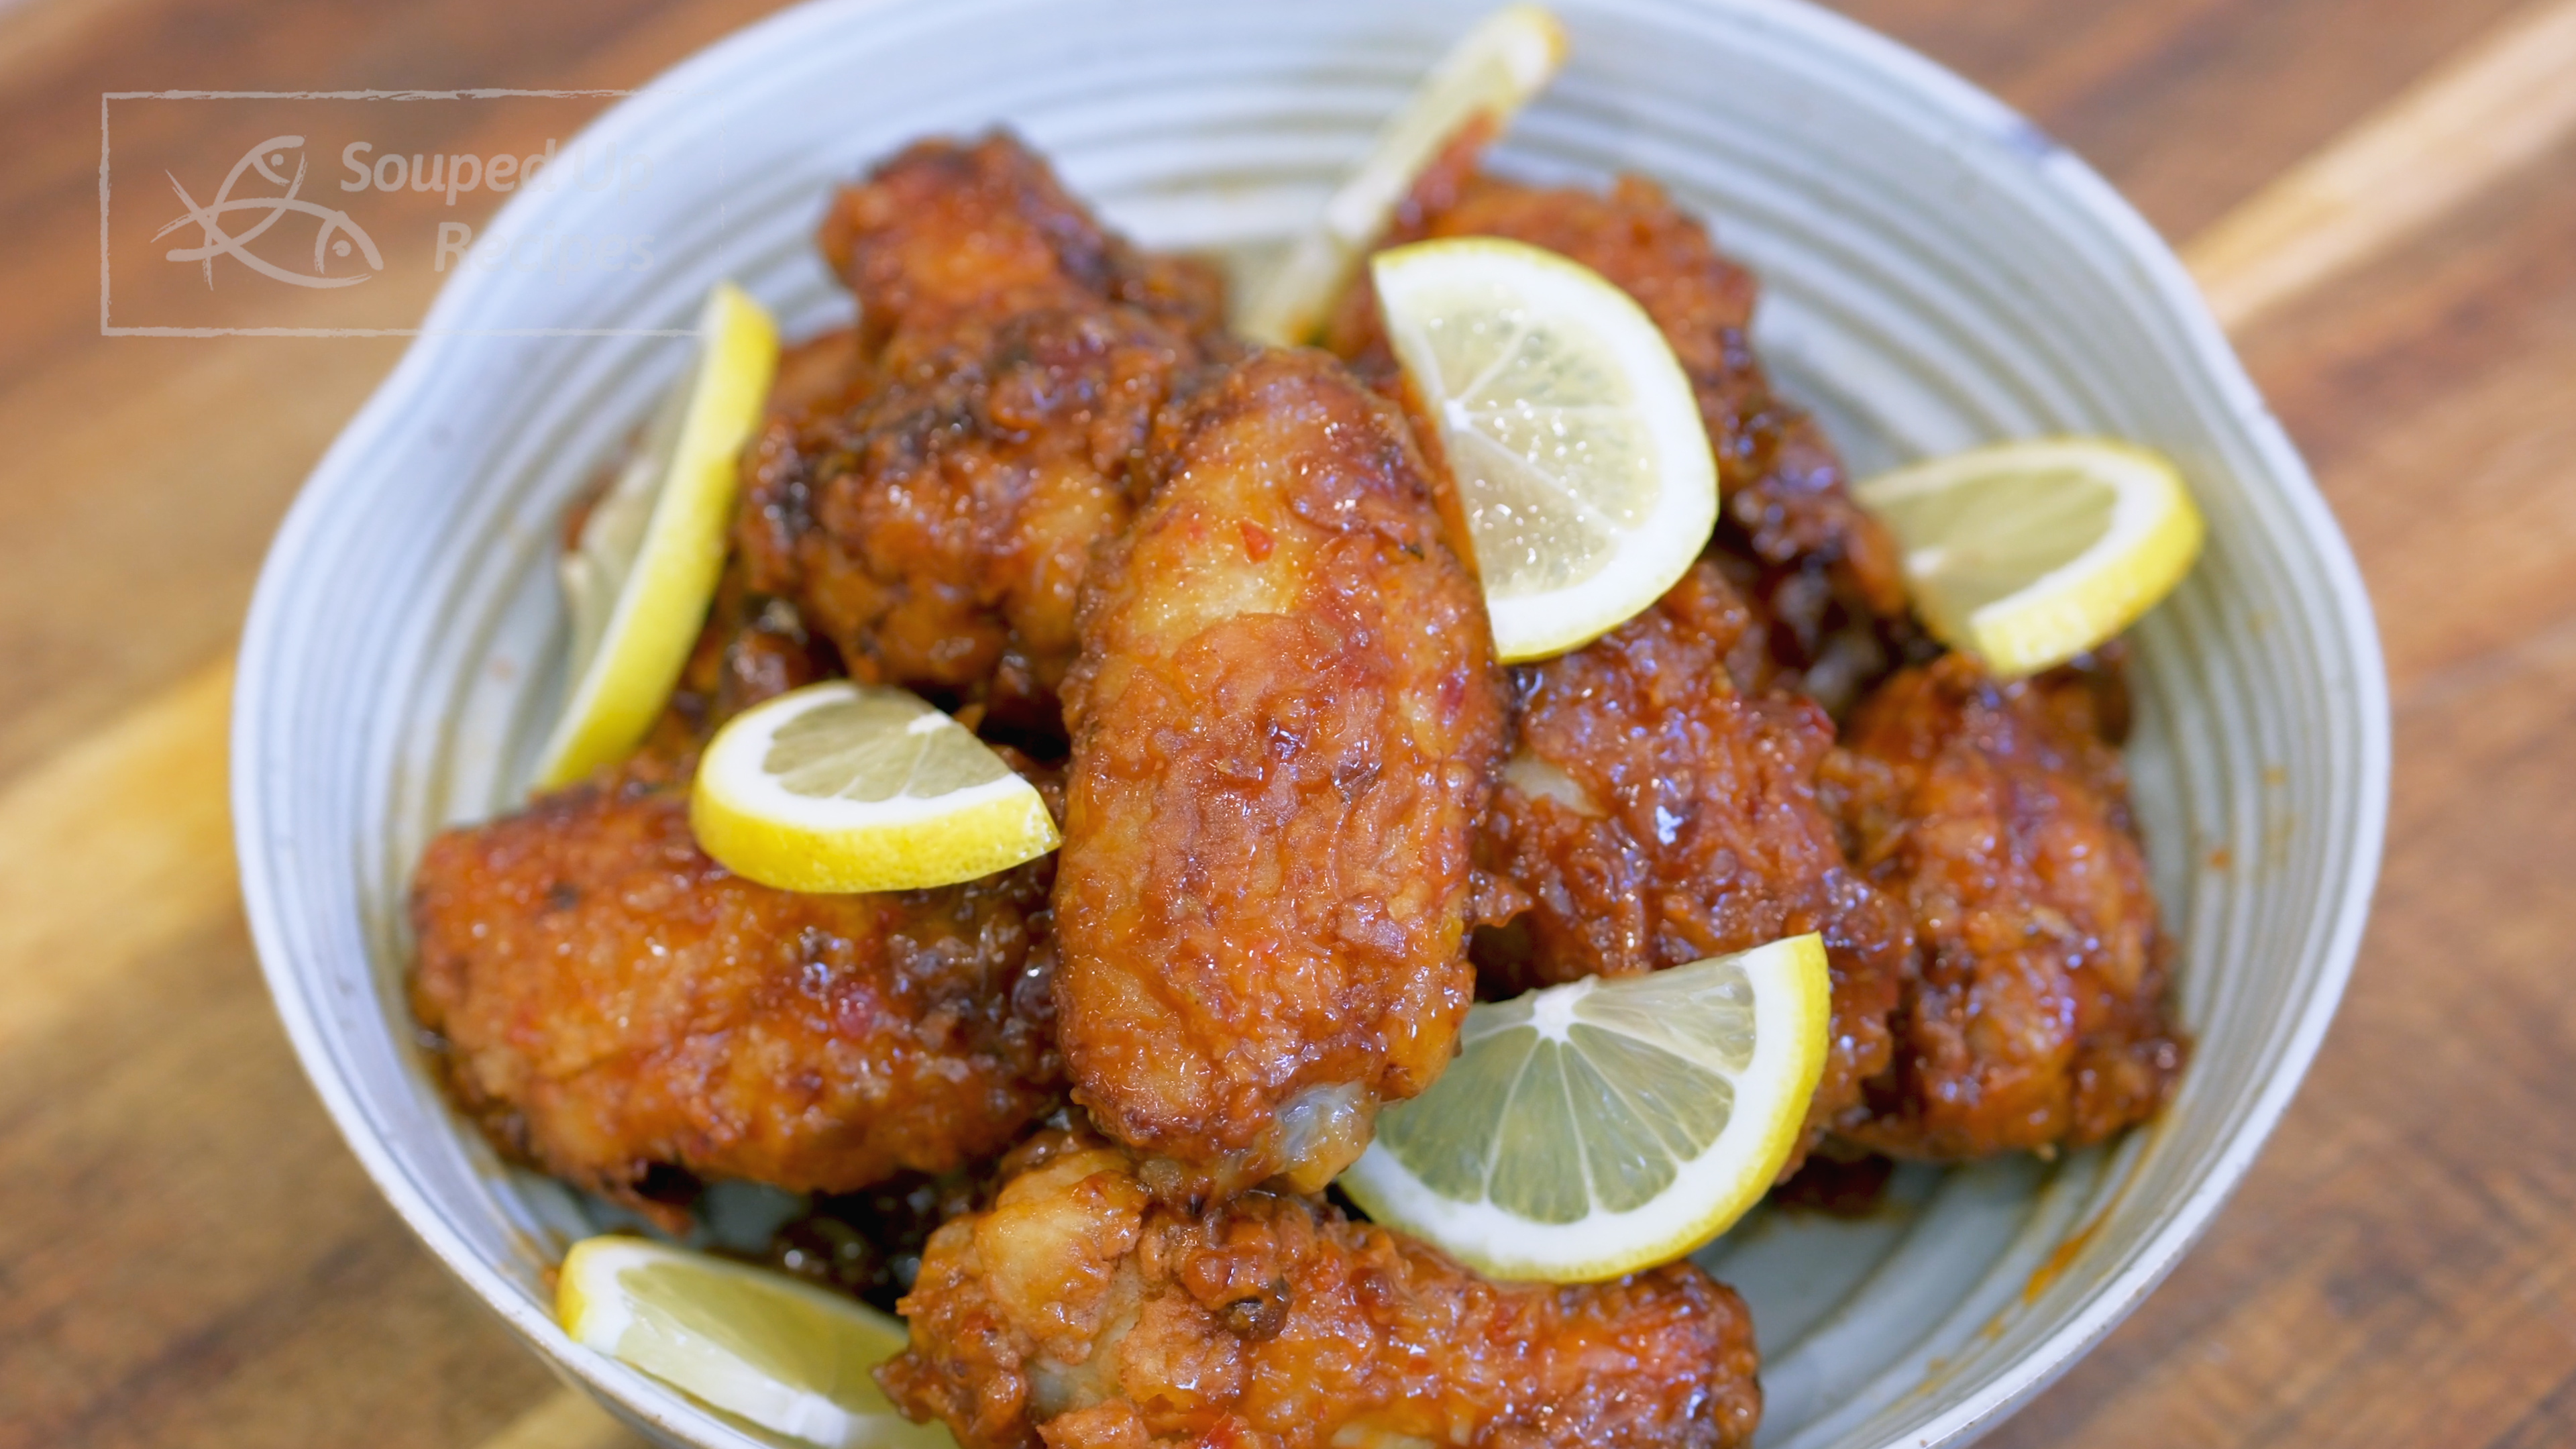 Image of Put some lemon slices next to the wings for garnish.